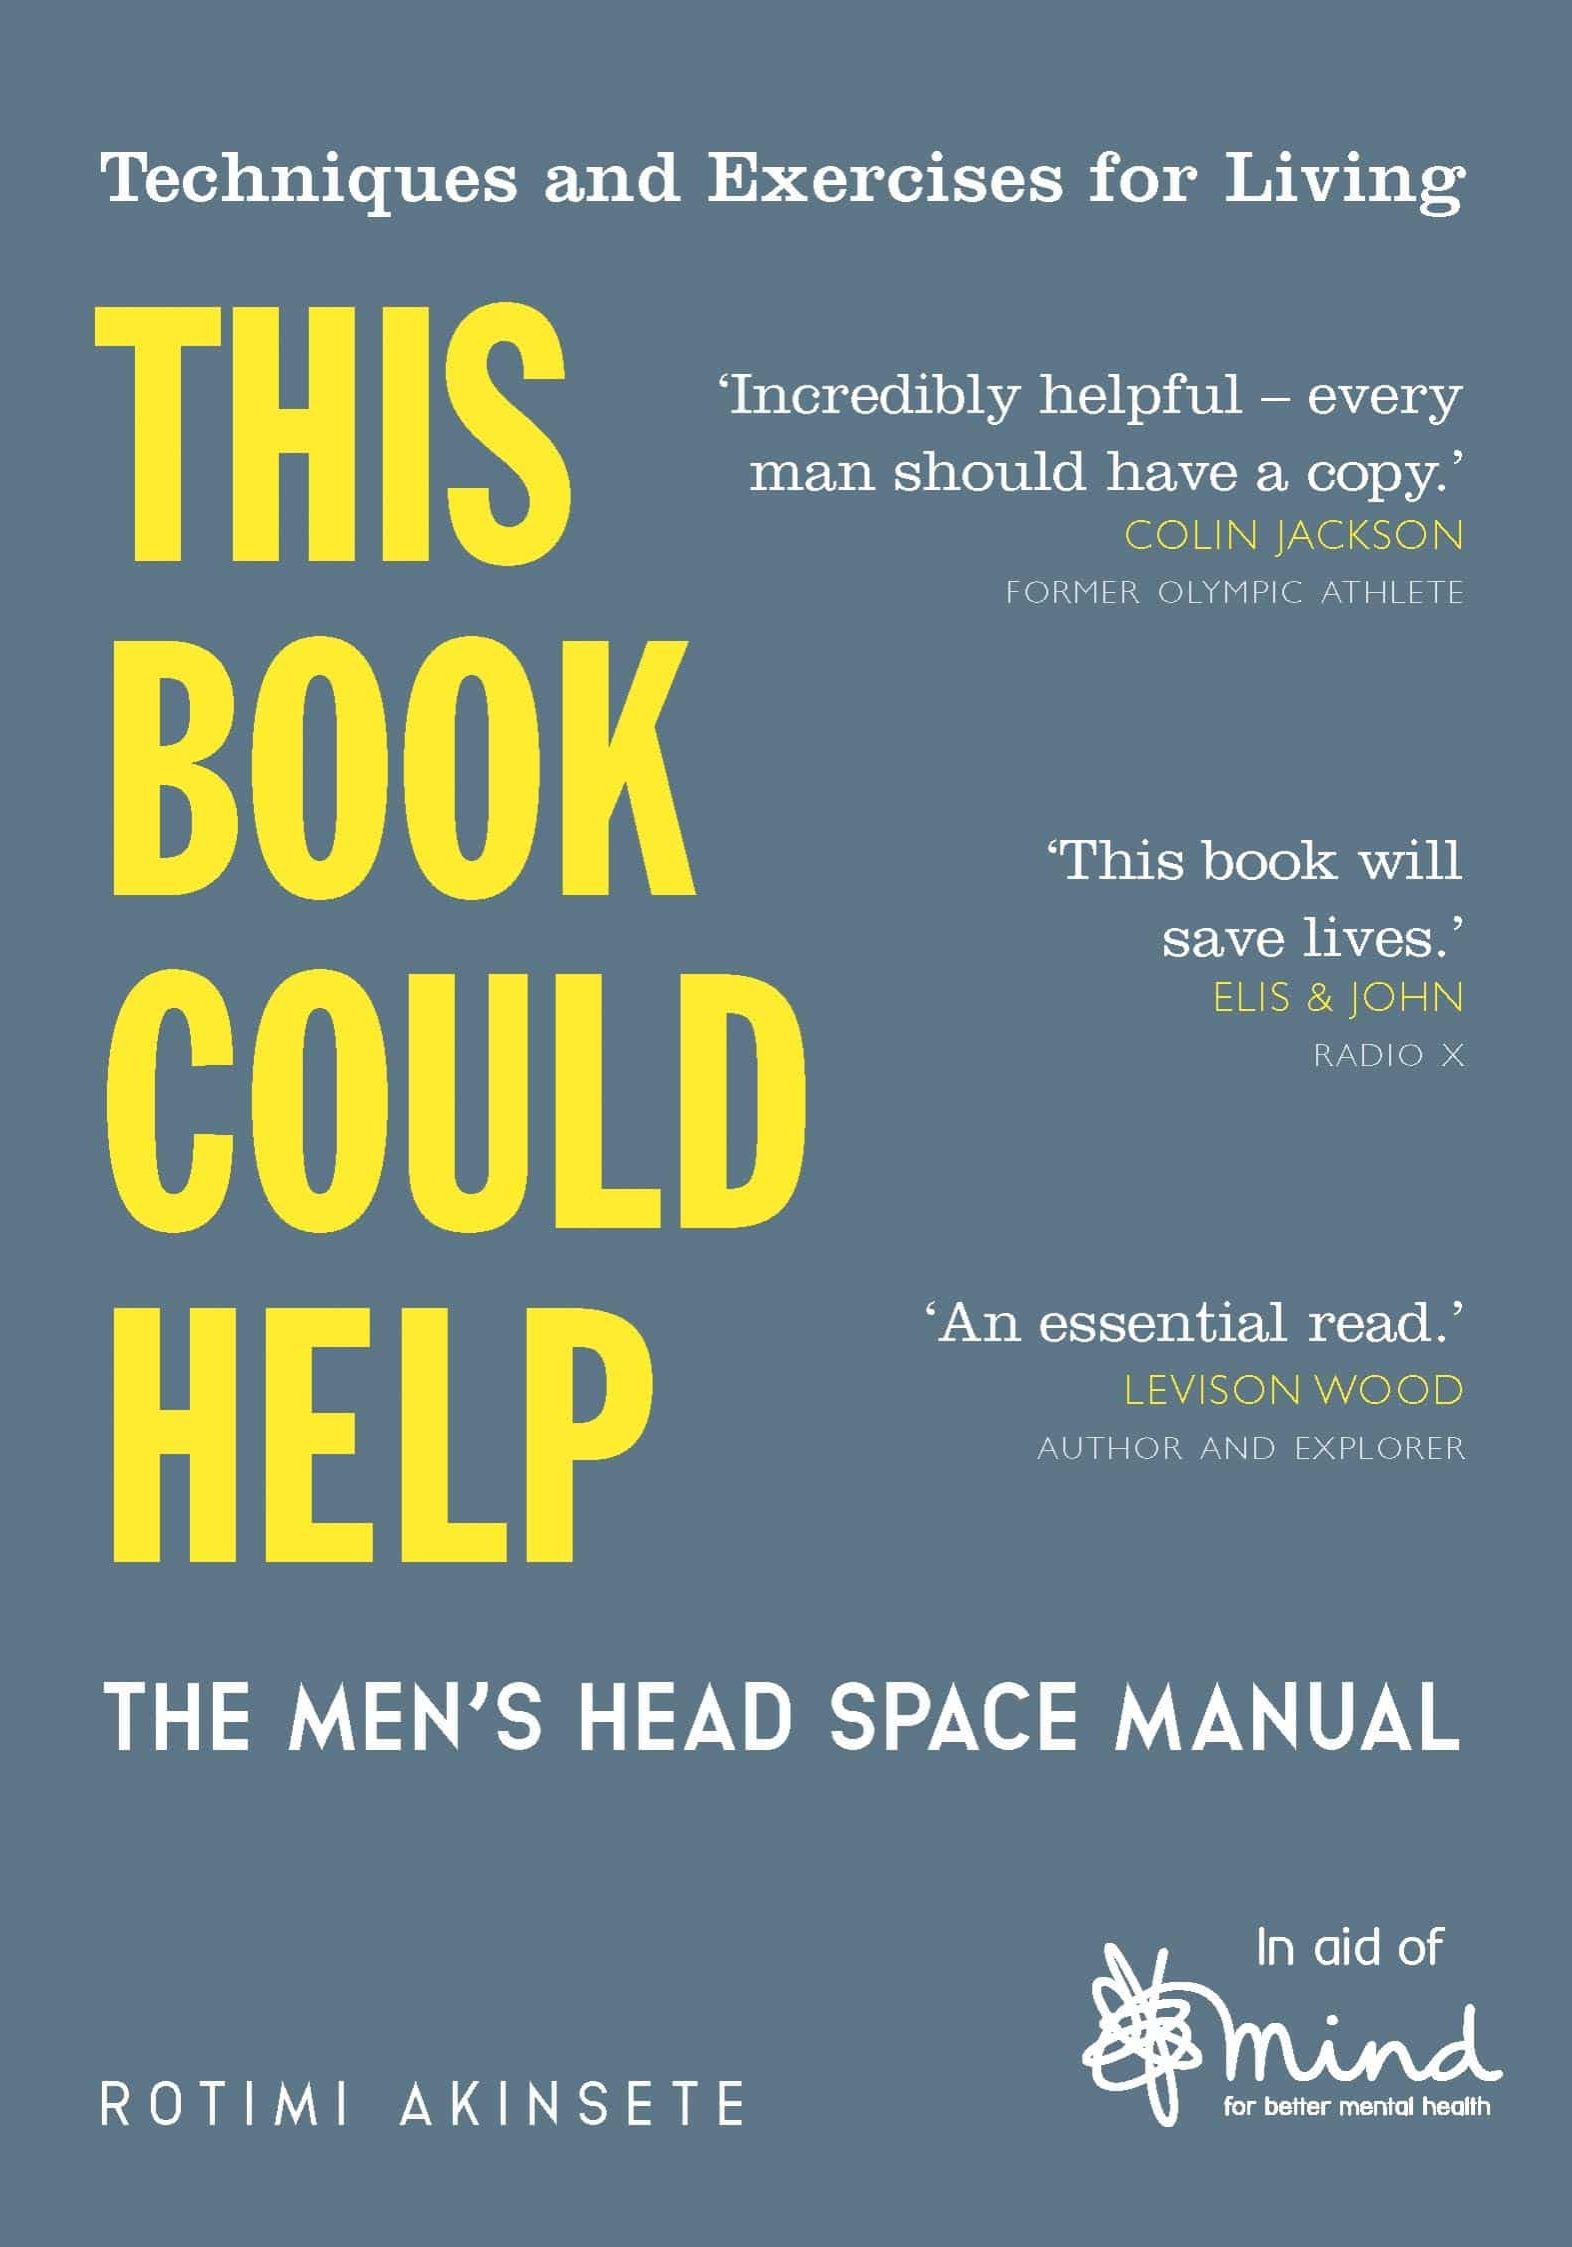 The book could help men's head space